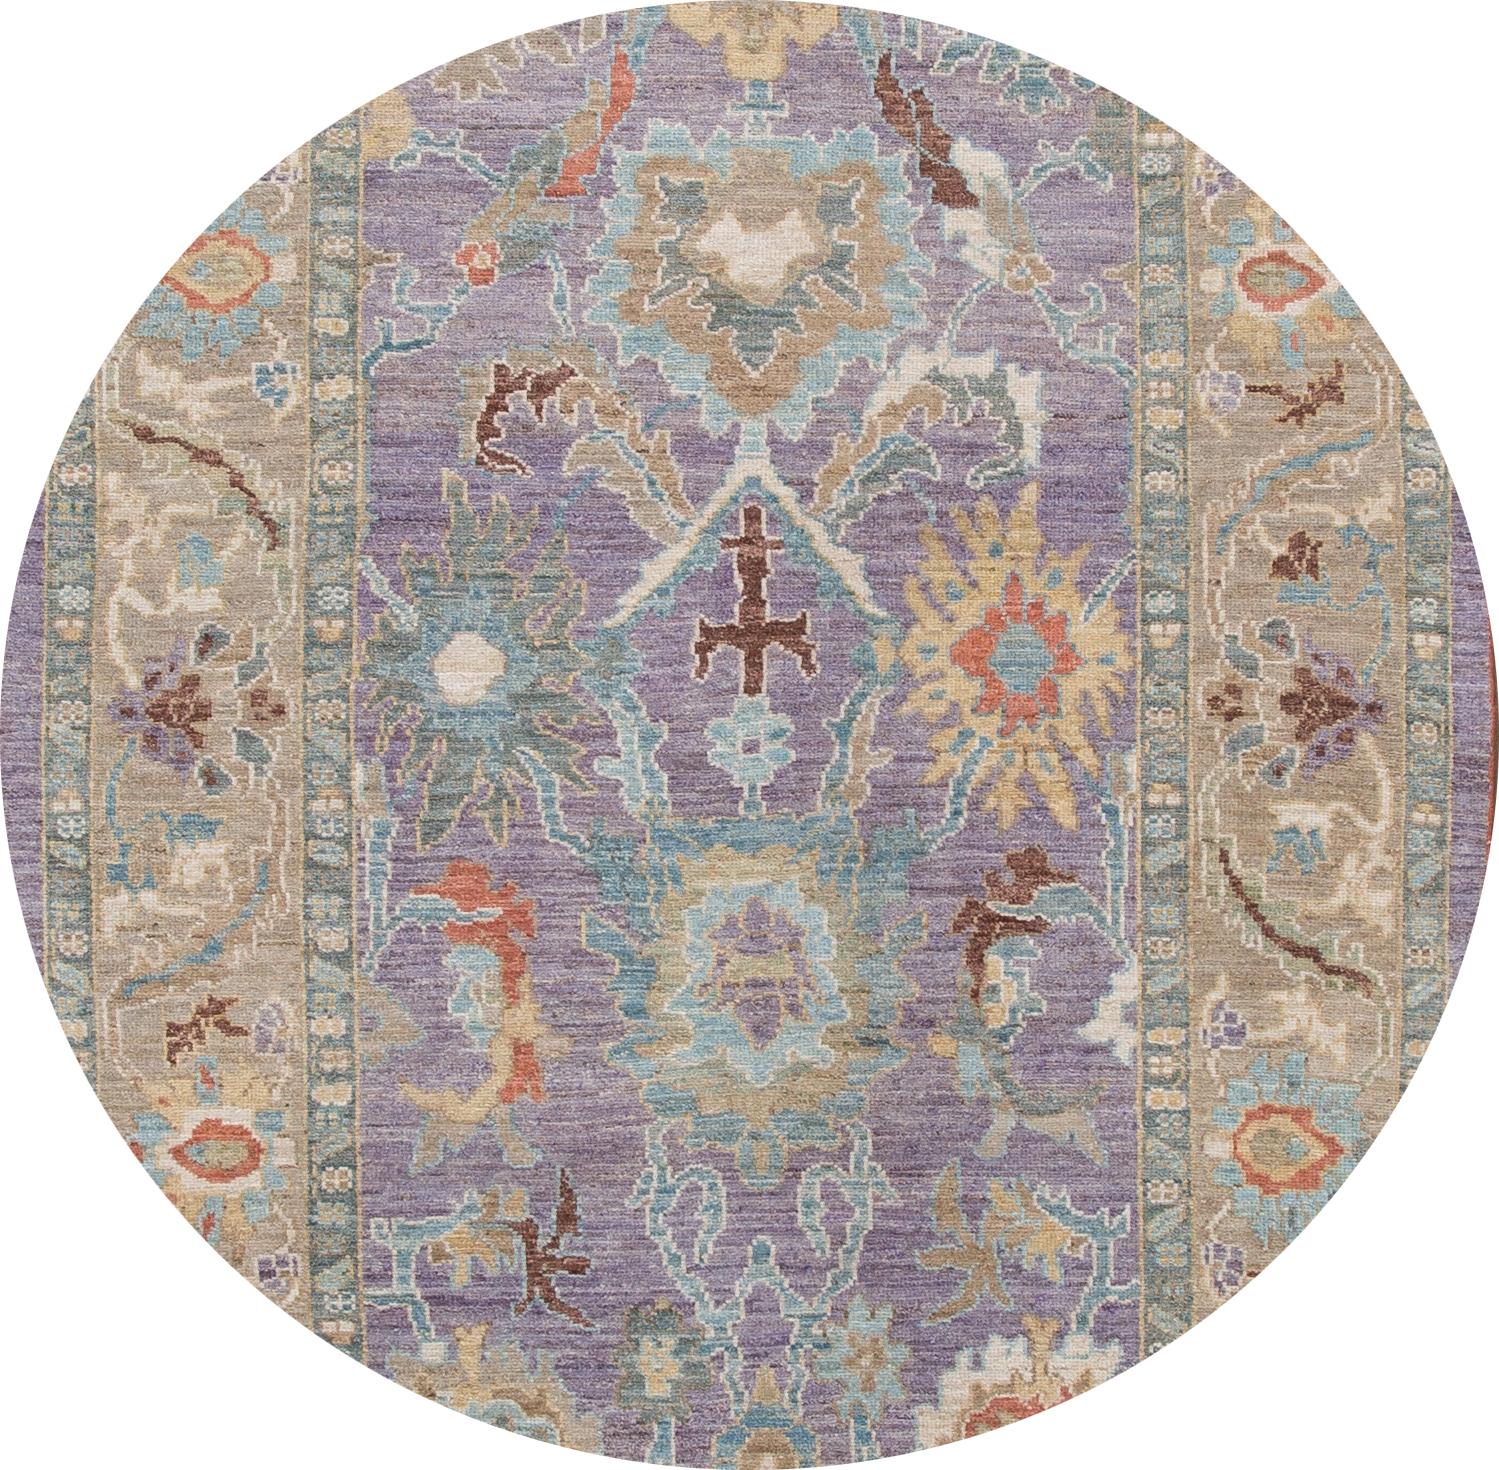 Beautiful contemporary Sultanabad rug, hand knotted wool with a purple field. This rug has a frame of beige and multi-color accents in all-over Classic floral medallion design.

This rug measures: 6' x 8'10